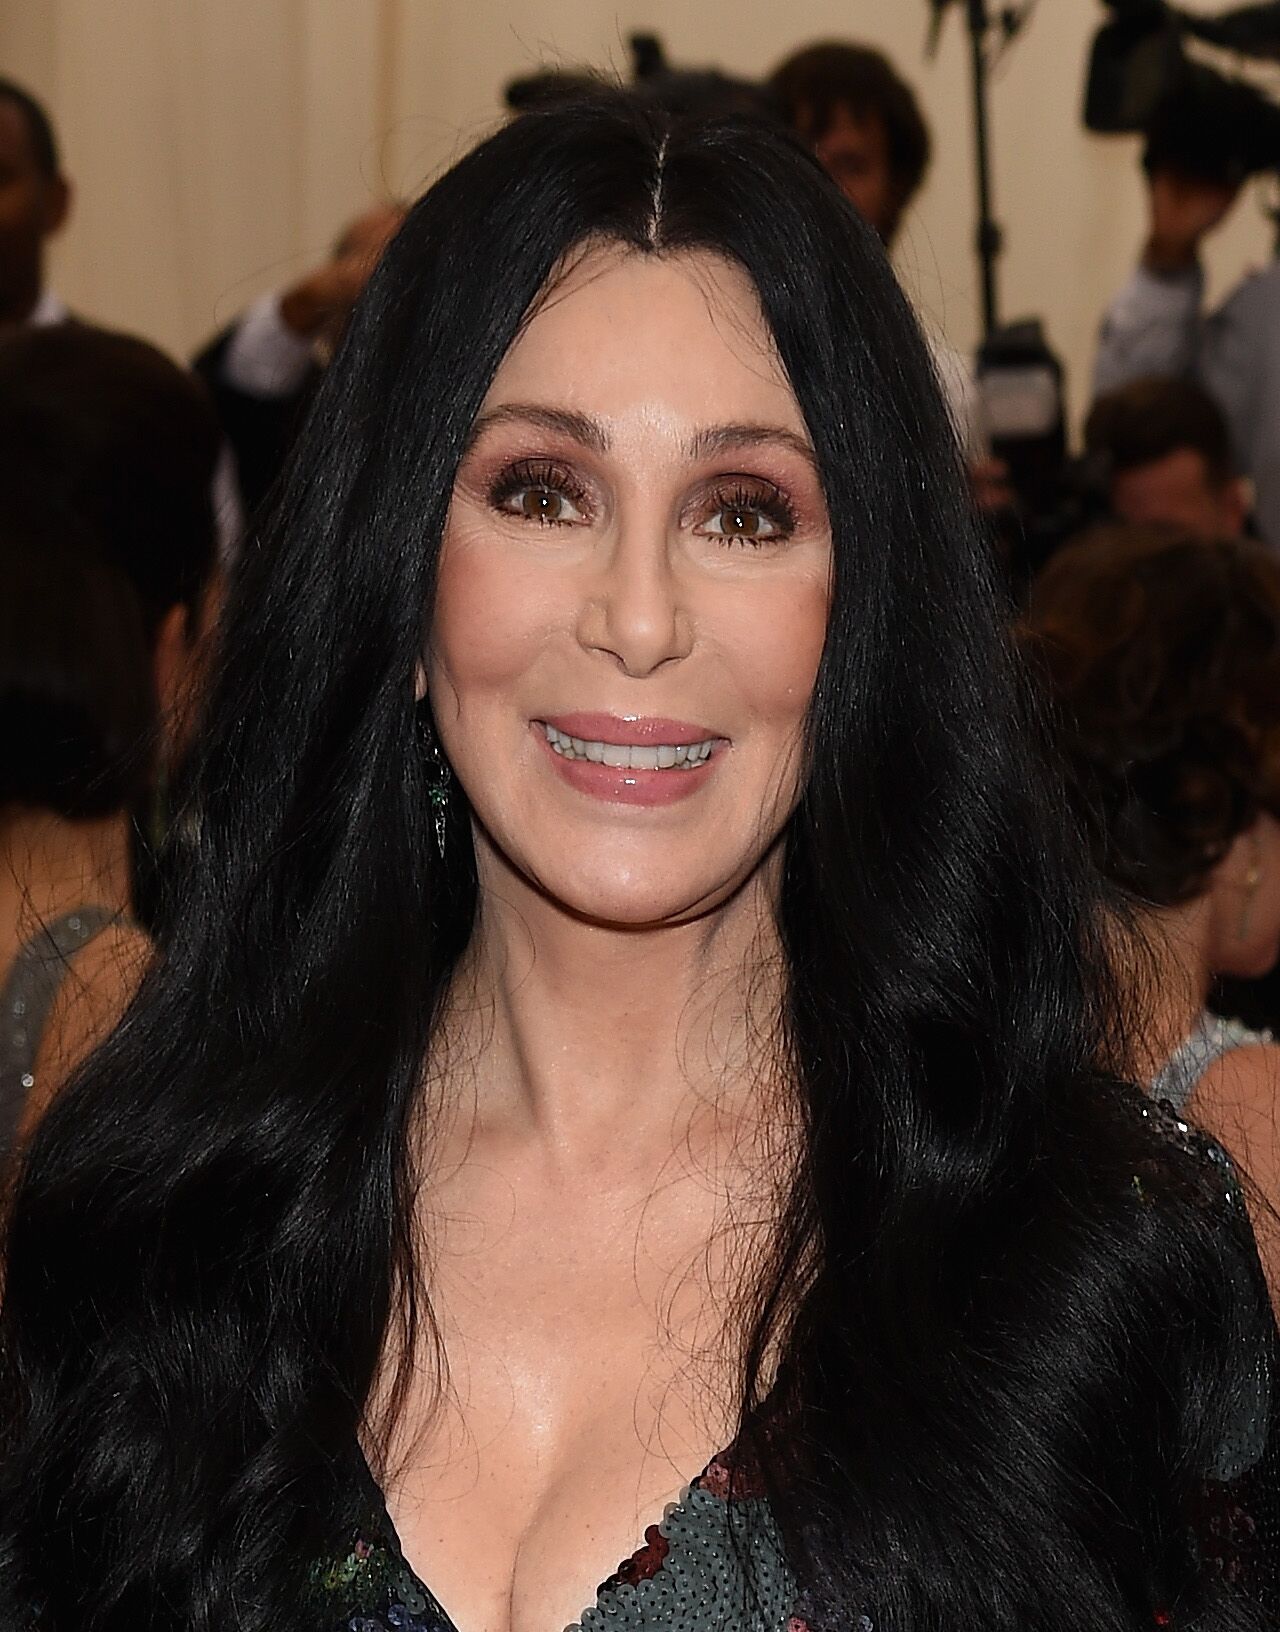 Cher attends the "China: Through The Looking Glass" Costume Institute Benefit Gala at the Metropolitan Museum of Art on May 4, 2015 in New York City | Photo: Getty Images 